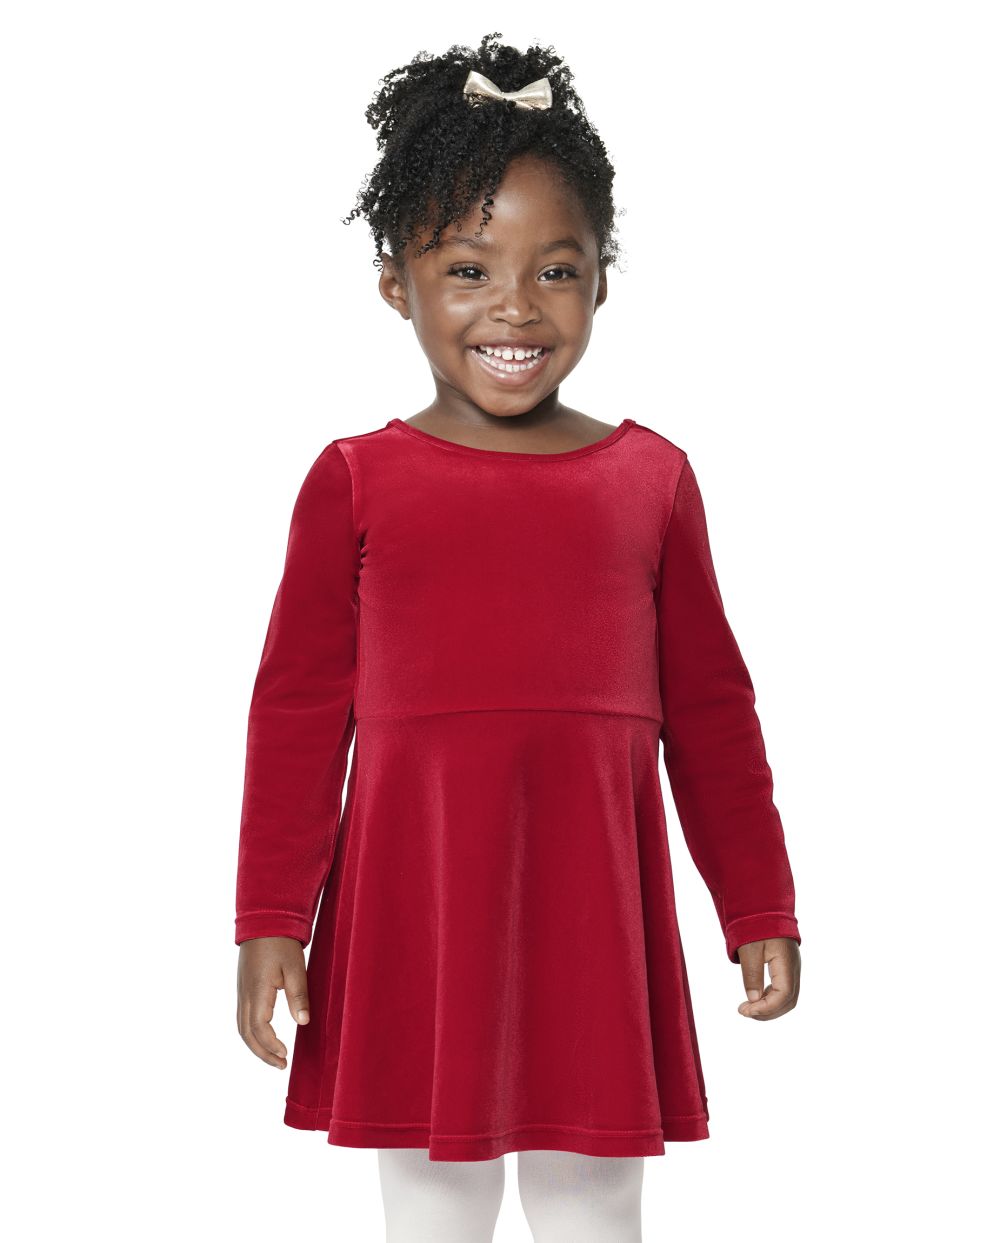 Toddler Baby Long Sleeves Above the Knee Dress